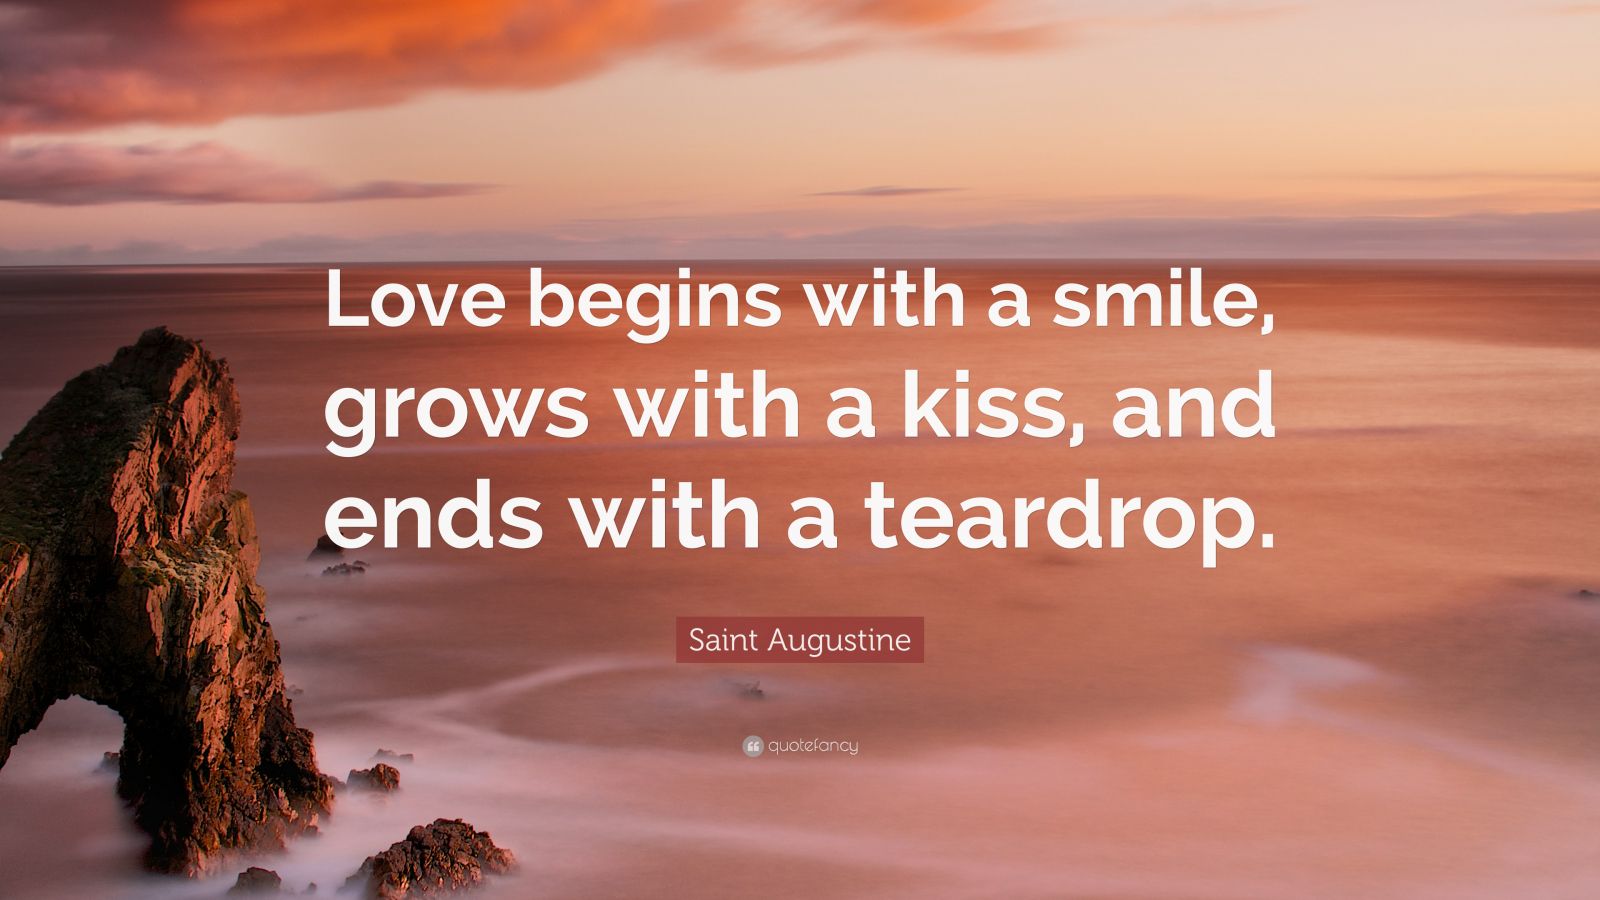 Saint Augustine Quote: “Love begins with a smile, grows with a kiss